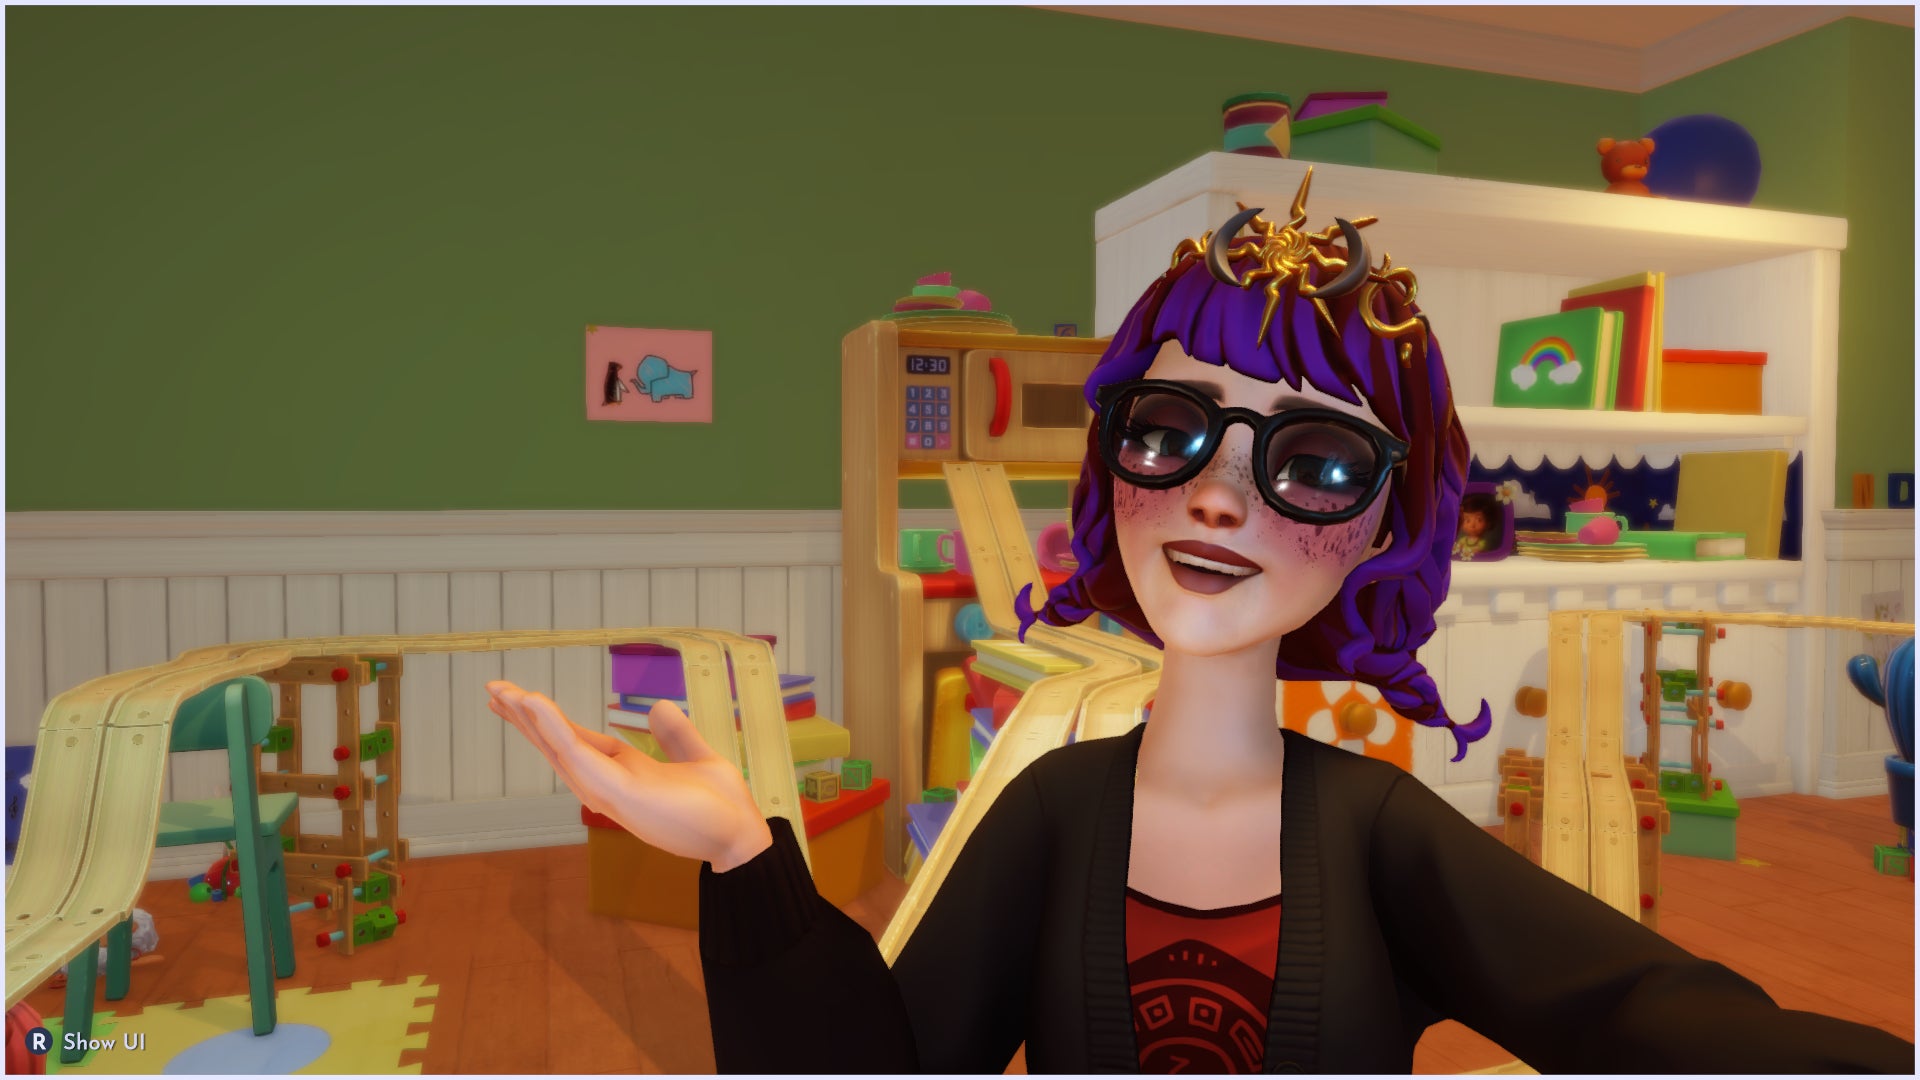 The player character is photographed next to one of Bonnie's drawings in Disney Dreamlight Valley's Toy Story realm